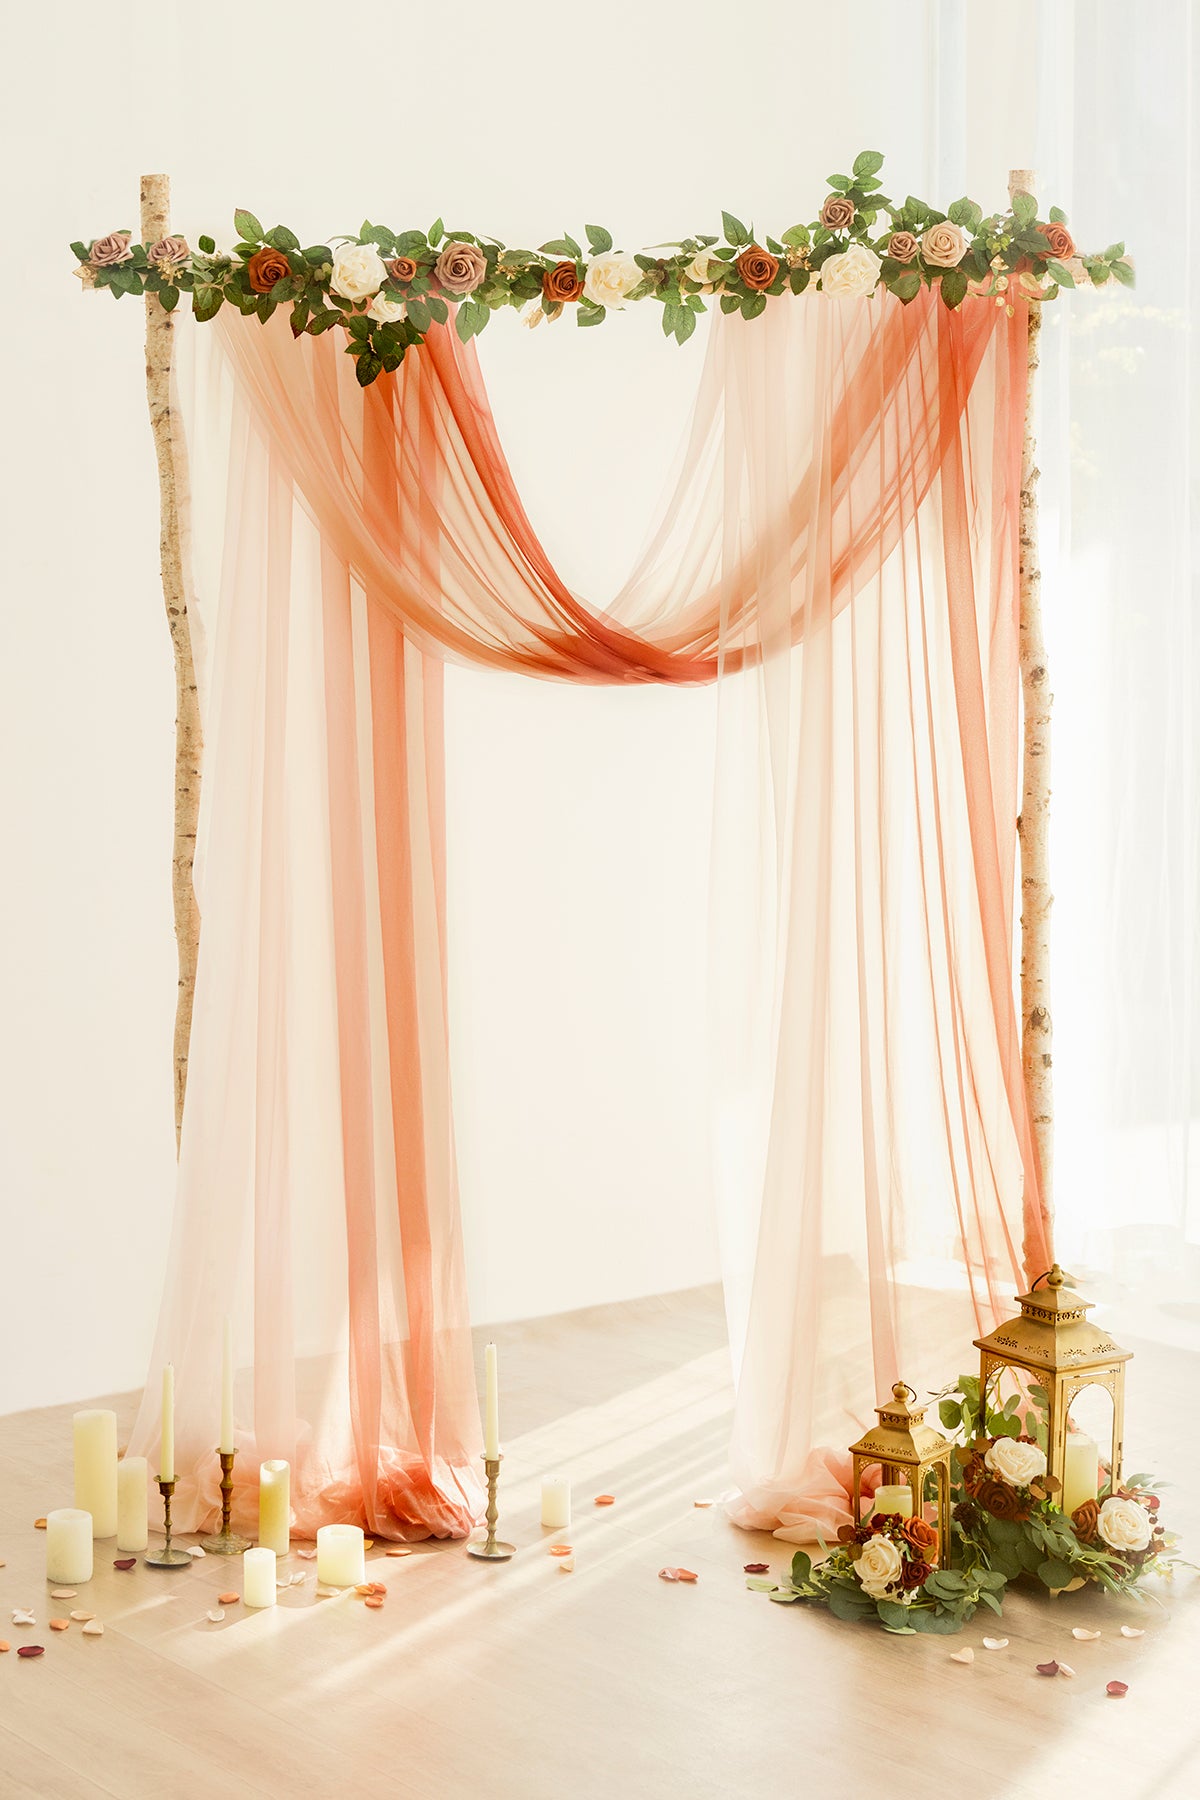 1 Panel Ombre Extra Wide Wedding Backdrop Curtain 60" W x 32ft L - Ombre Colors| Clearance